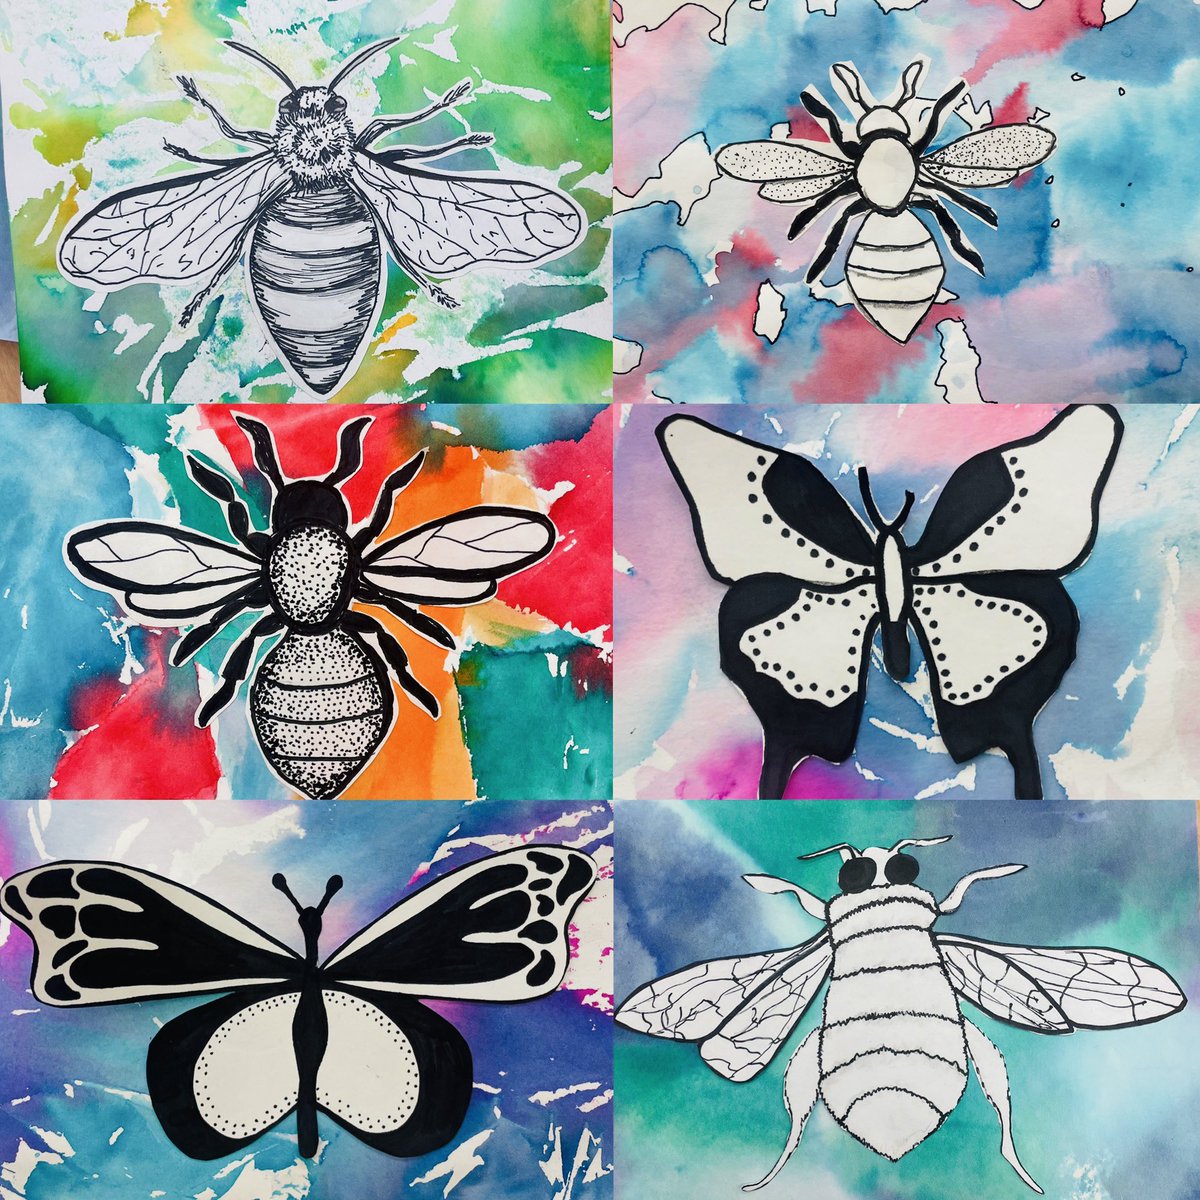 My 7th grade ended their year with awesome tissue paper stained insects 🐞 @BereaCSD @BmmsTitans #middleschoolart #BeATitan